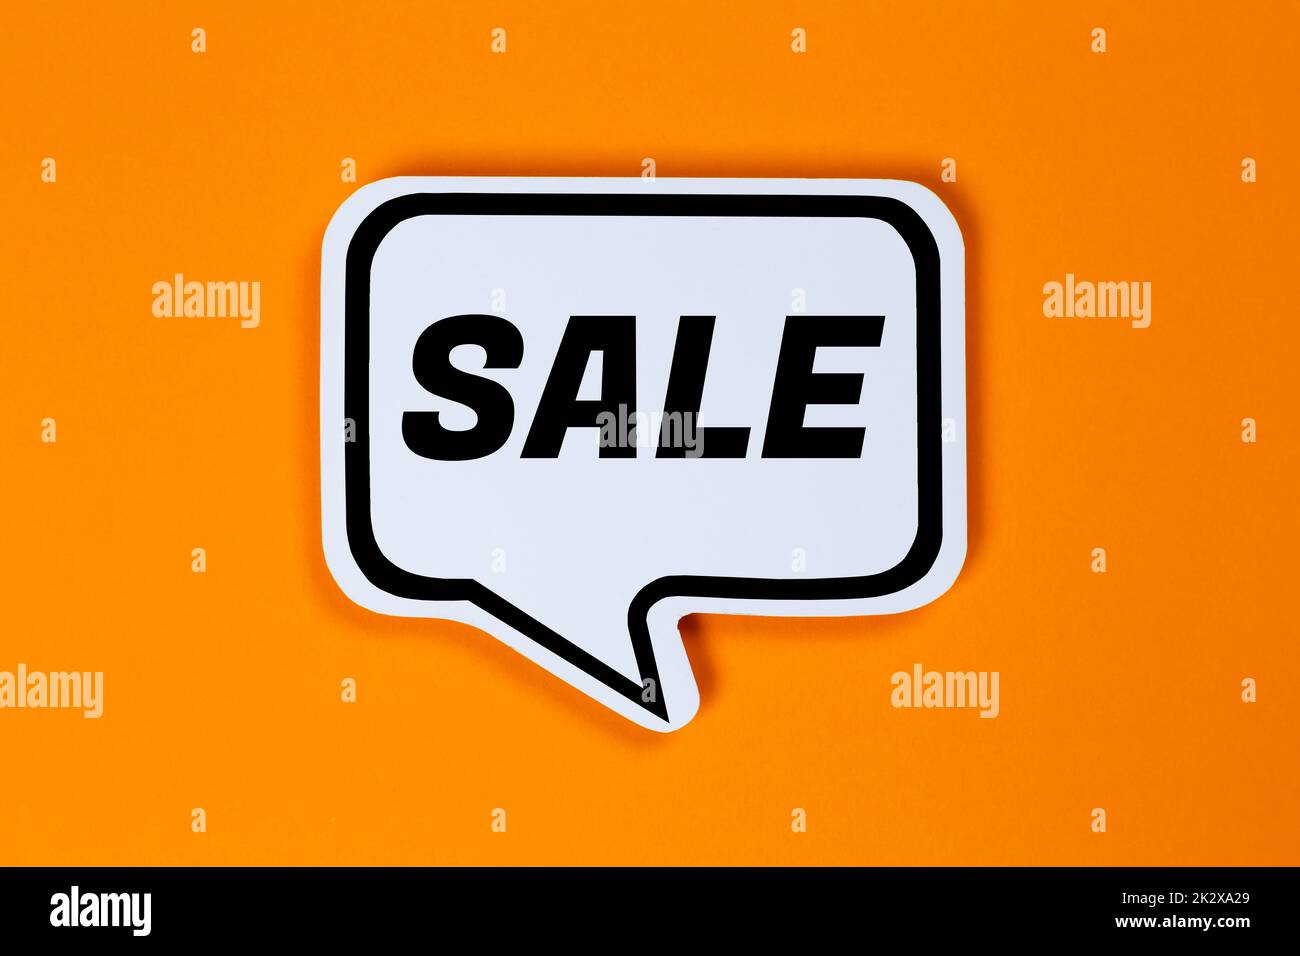 Sale shopping offer speech bubble communication concept talking saying Stock Photo